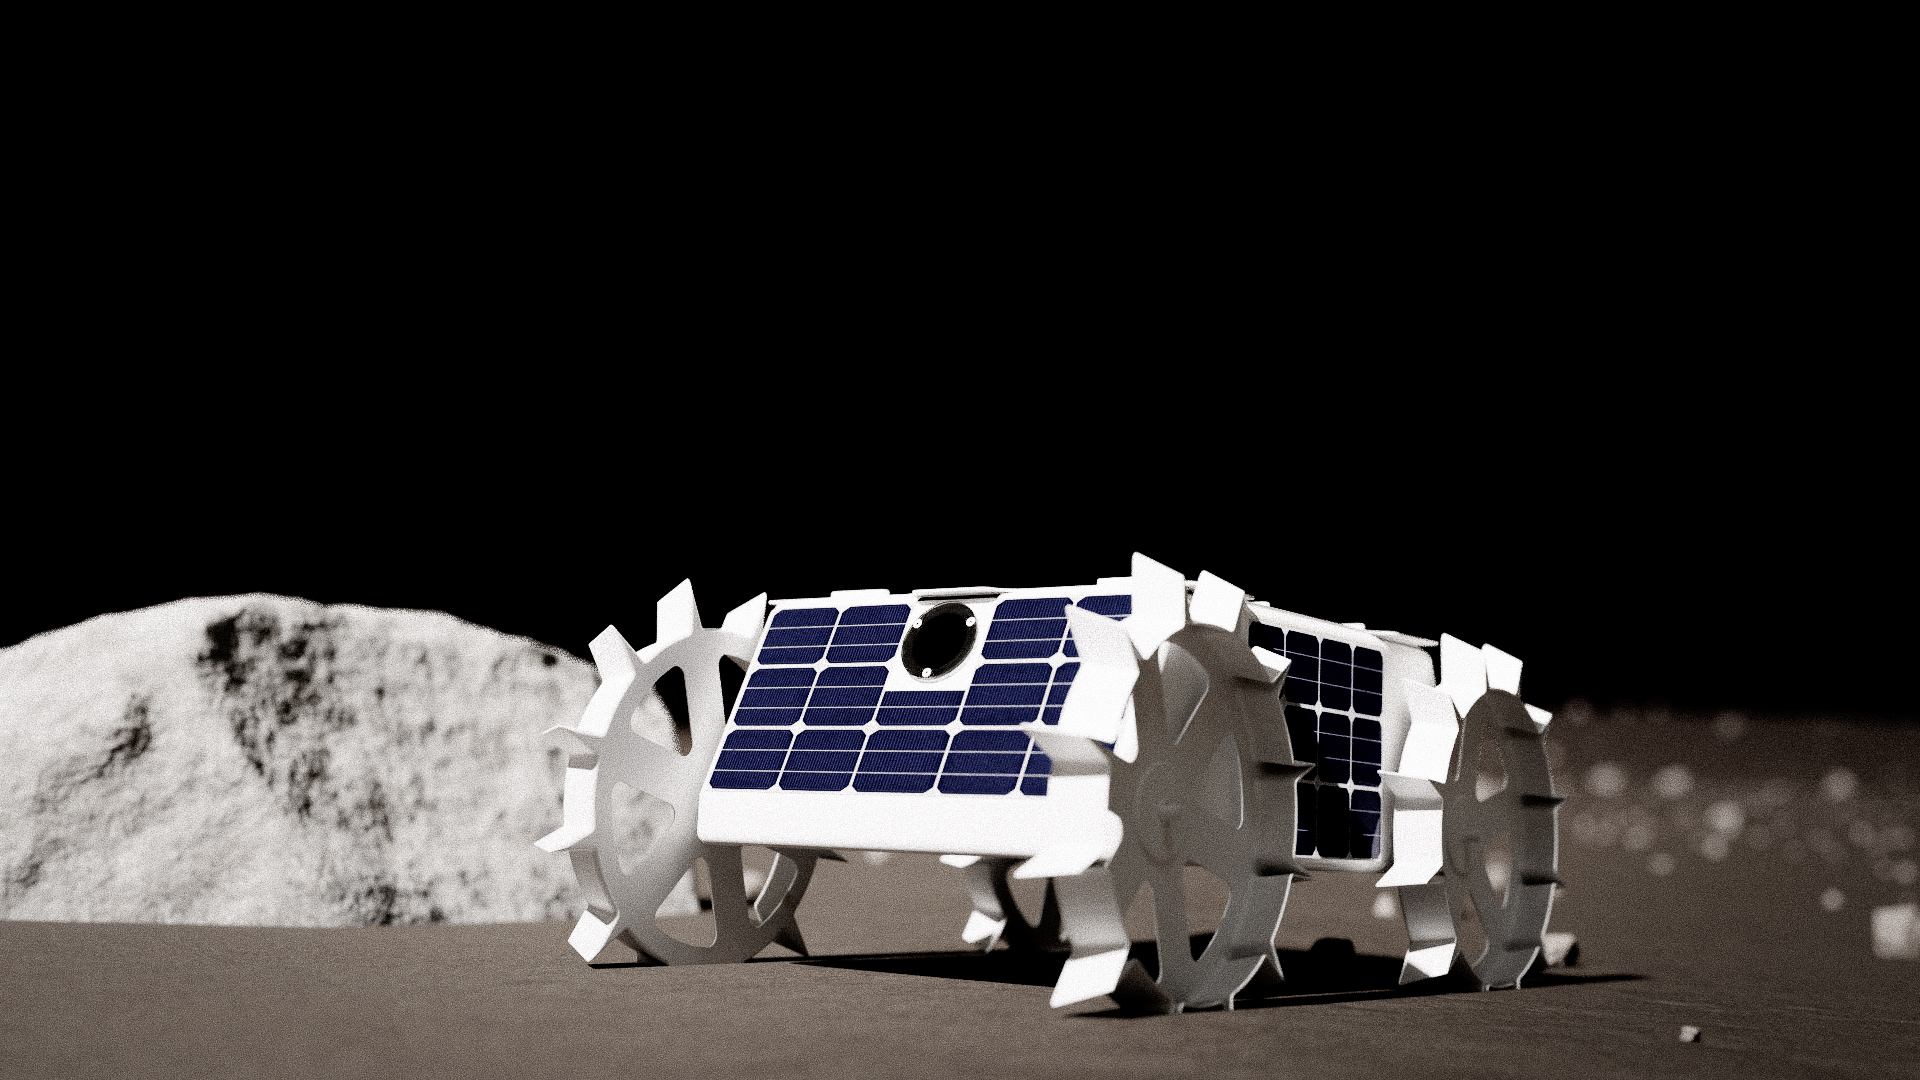 Astrobotic CubeRover with solar panels that is being developed under NASA’s Tipping Point solicitation.